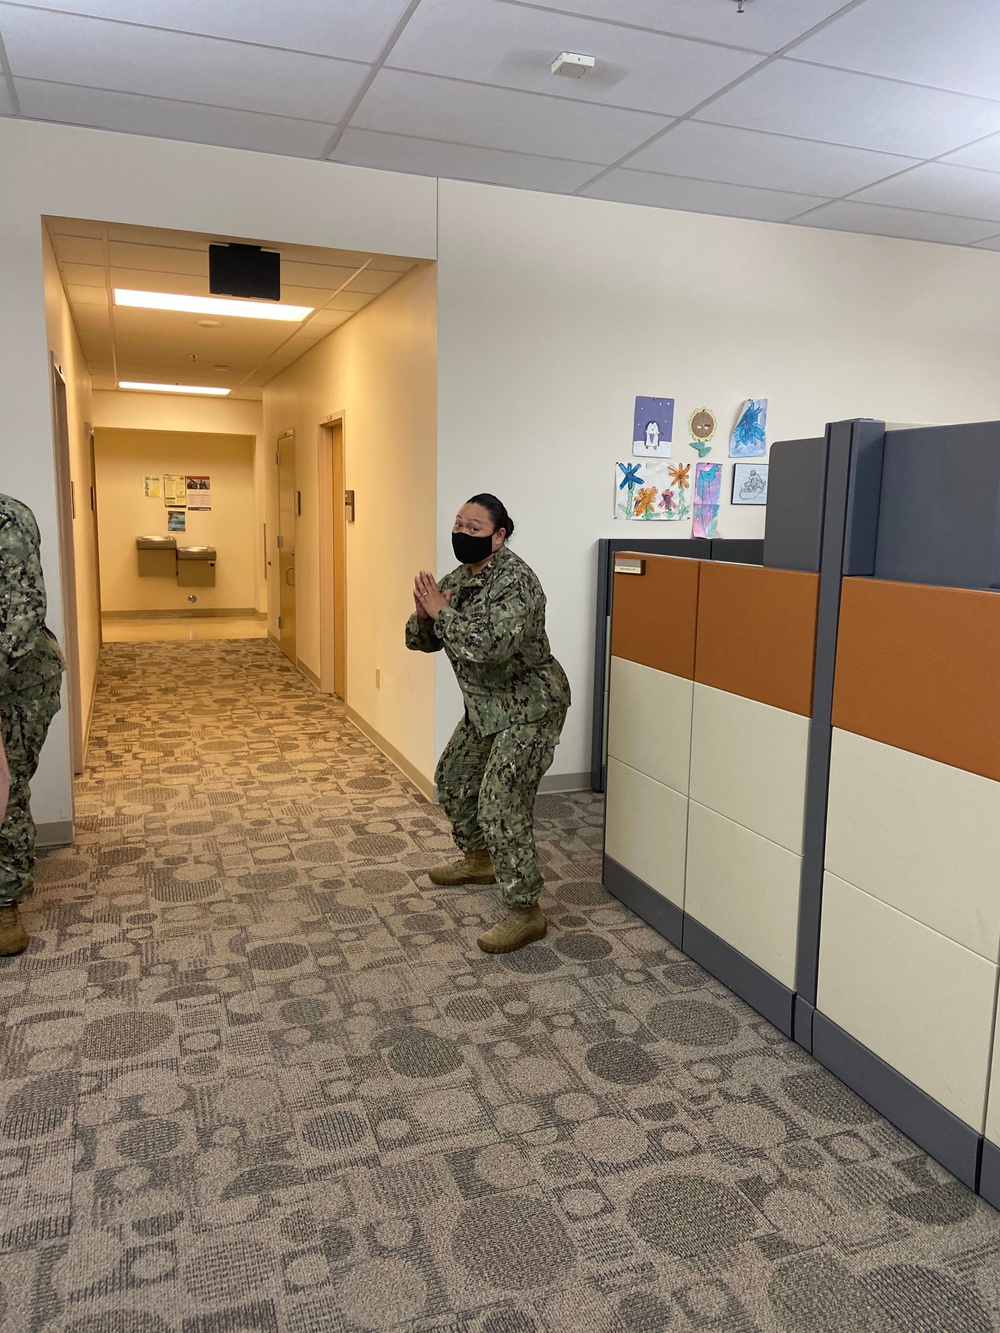 NEPMU-2 Sailors Stay Physically and Mentally Fit During a Global Pandemic through Cubicle and At-Home Workout Challenges